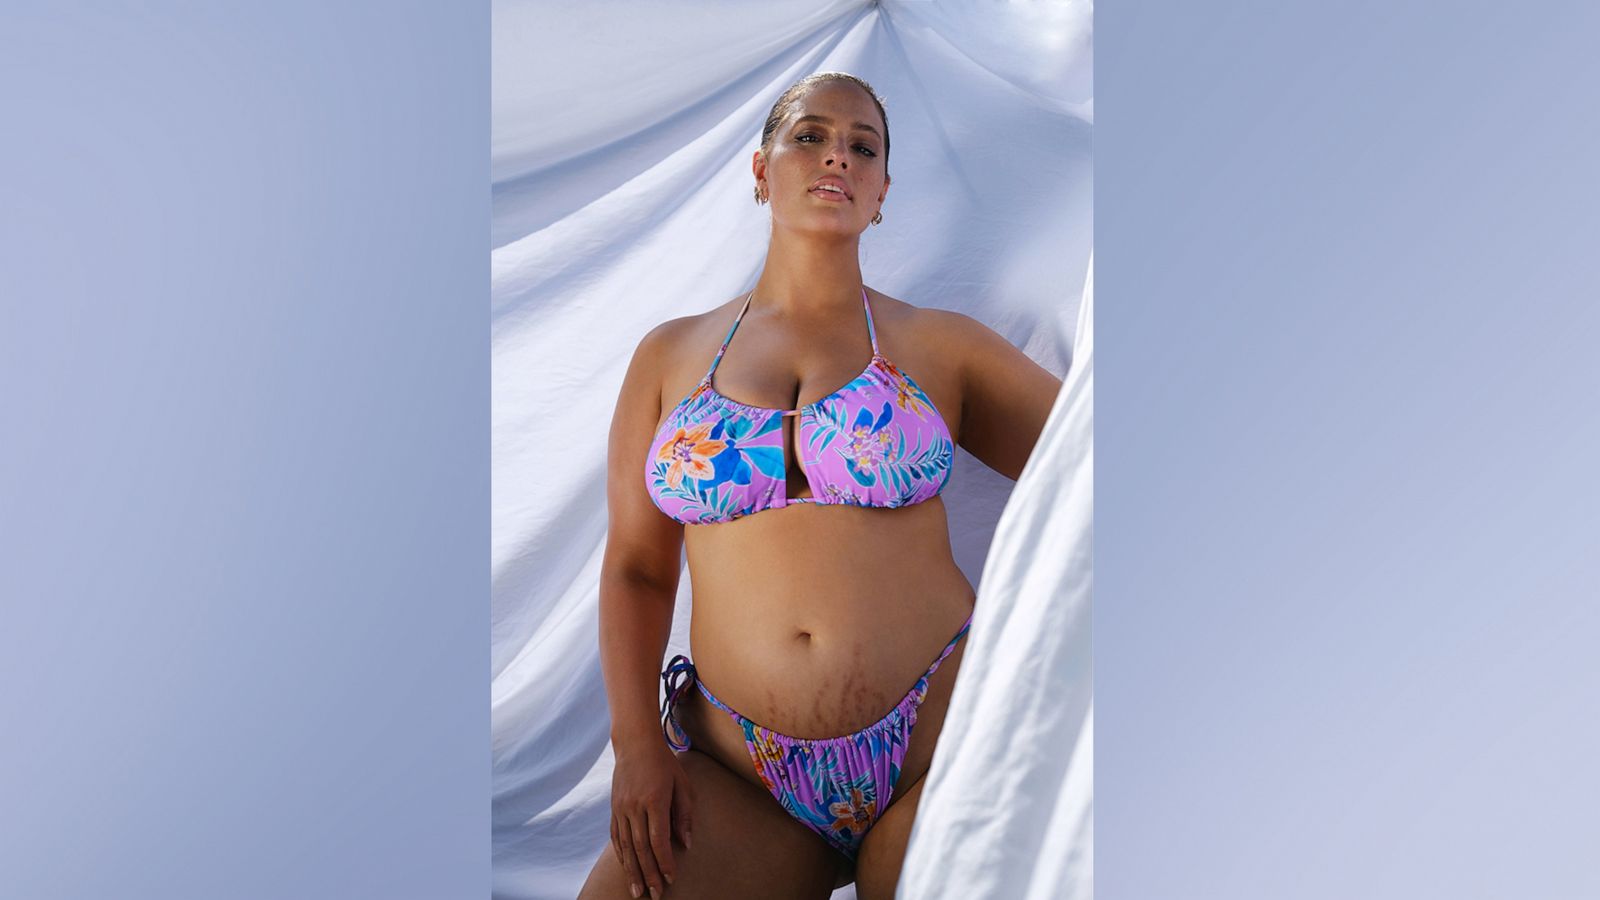 swimsuitsforall Unveils First Plus Size Model Celebrating Her